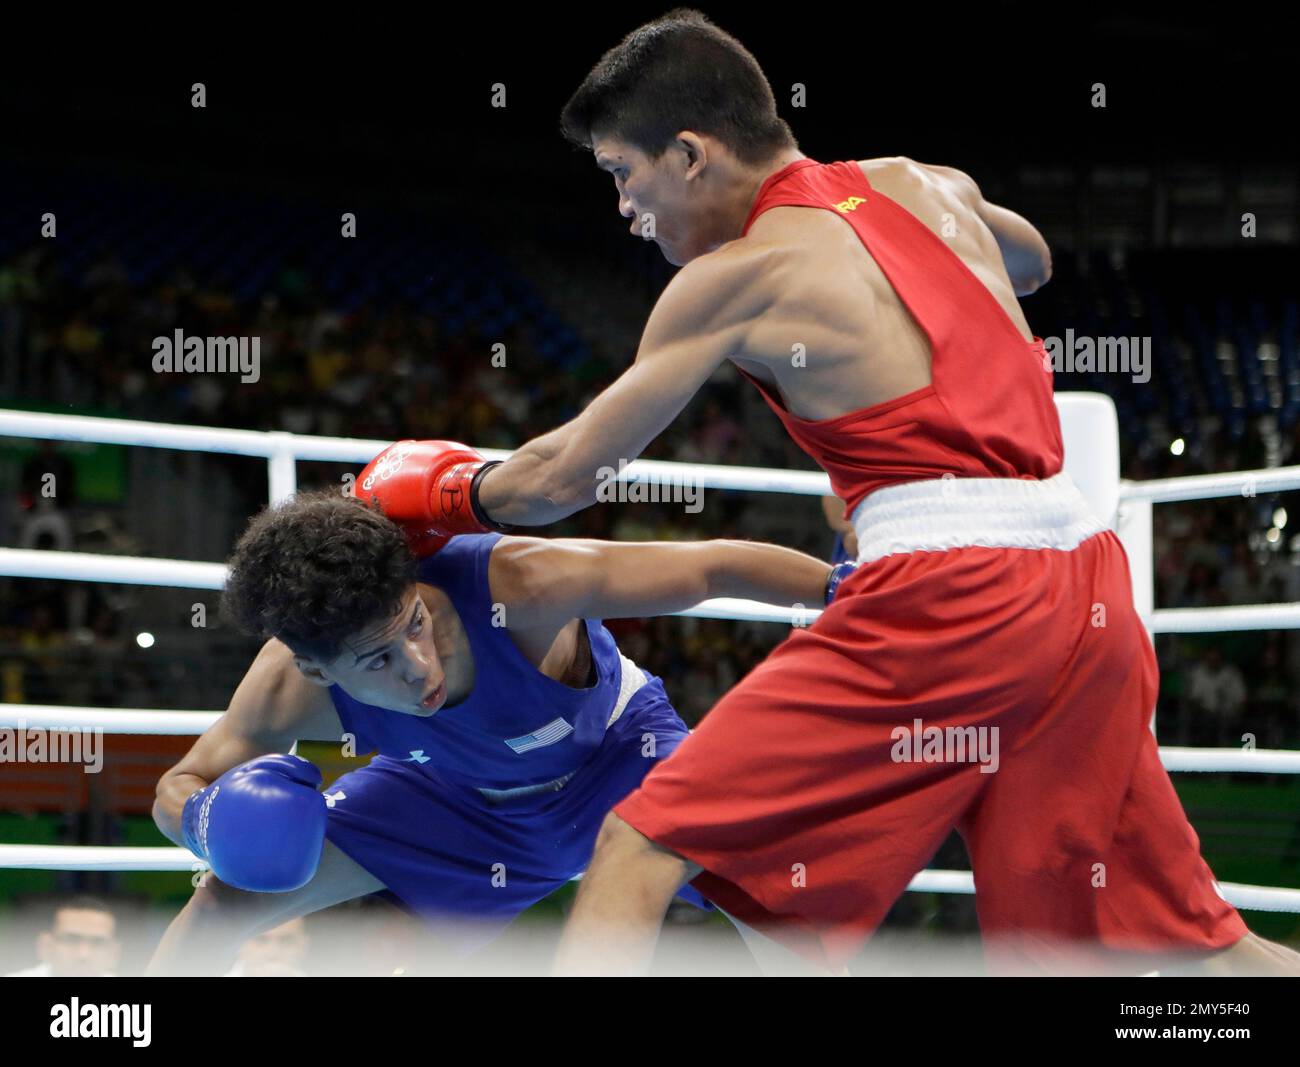 United States' Antonio Vargas, left, fights Brazil's Juliao Neto during a men's flyweight 52-kg preliminary boxing match at the 2016 Summer Olympics in Rio de Janeiro, Brazil, Saturday, Aug. 13, 2016. (AP Photo/Frank Franklin II) Banque D'Images